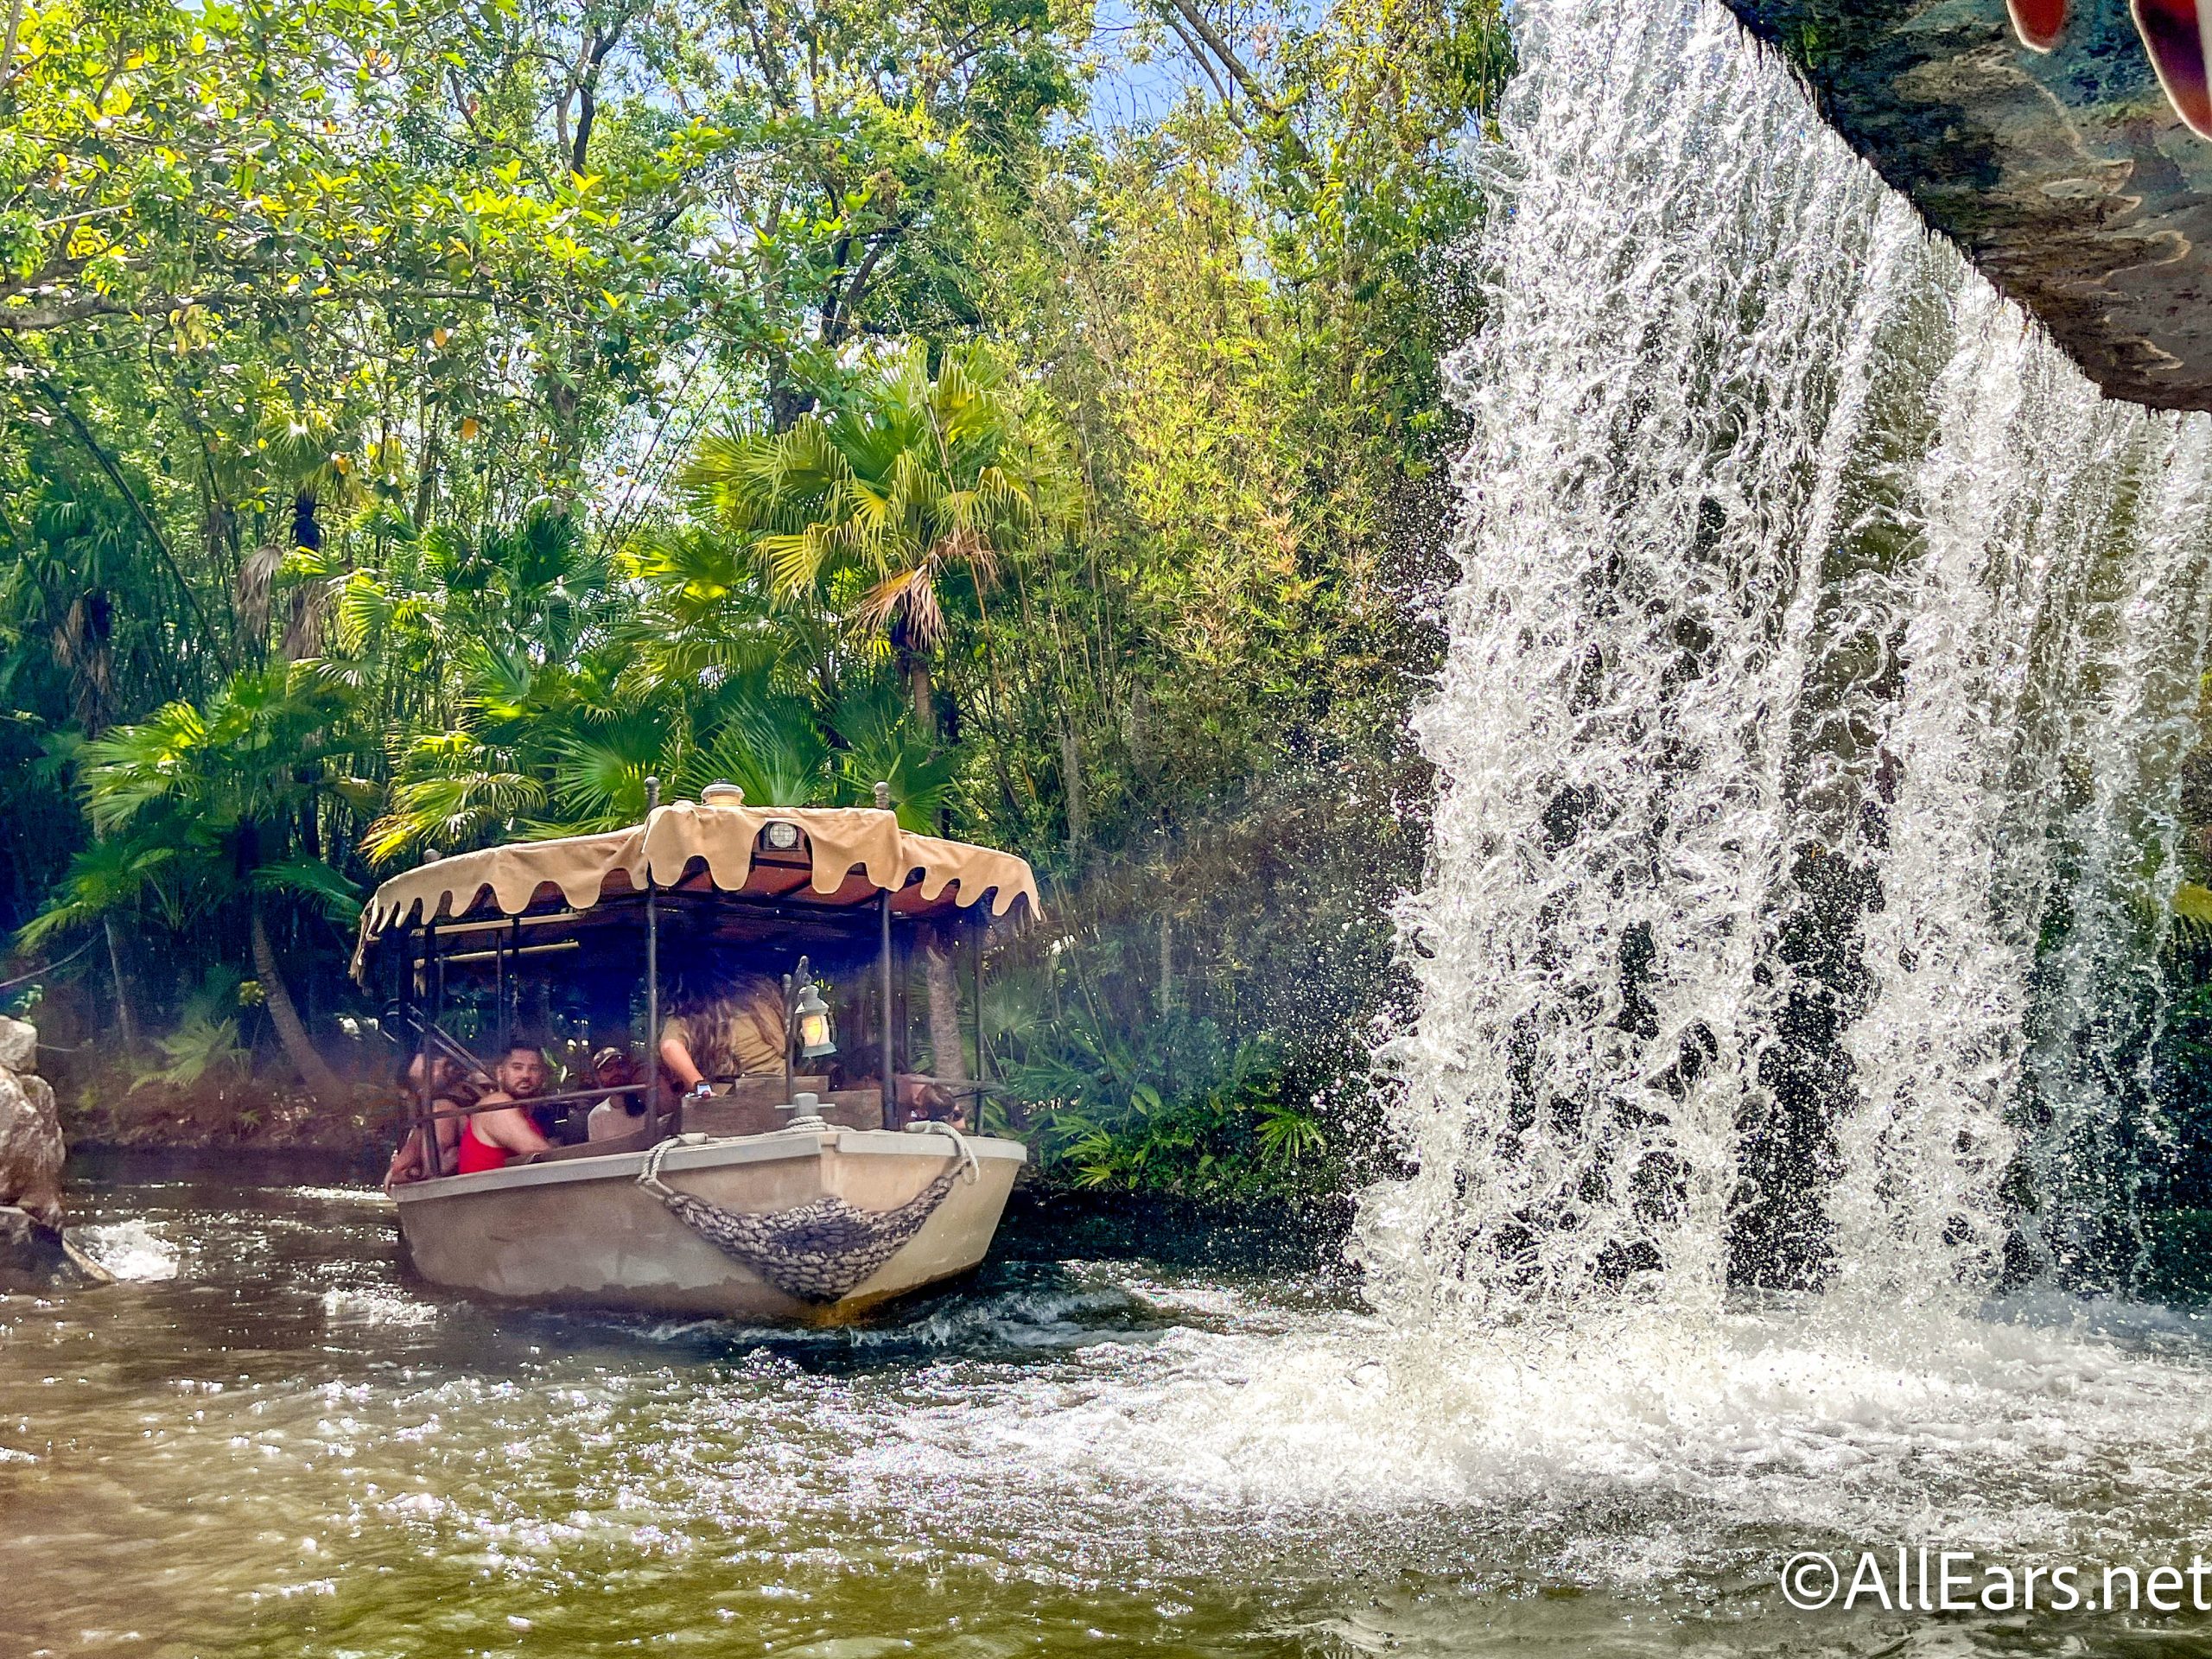 25 Things You Didn't Know About Jungle Cruise in Disney World 